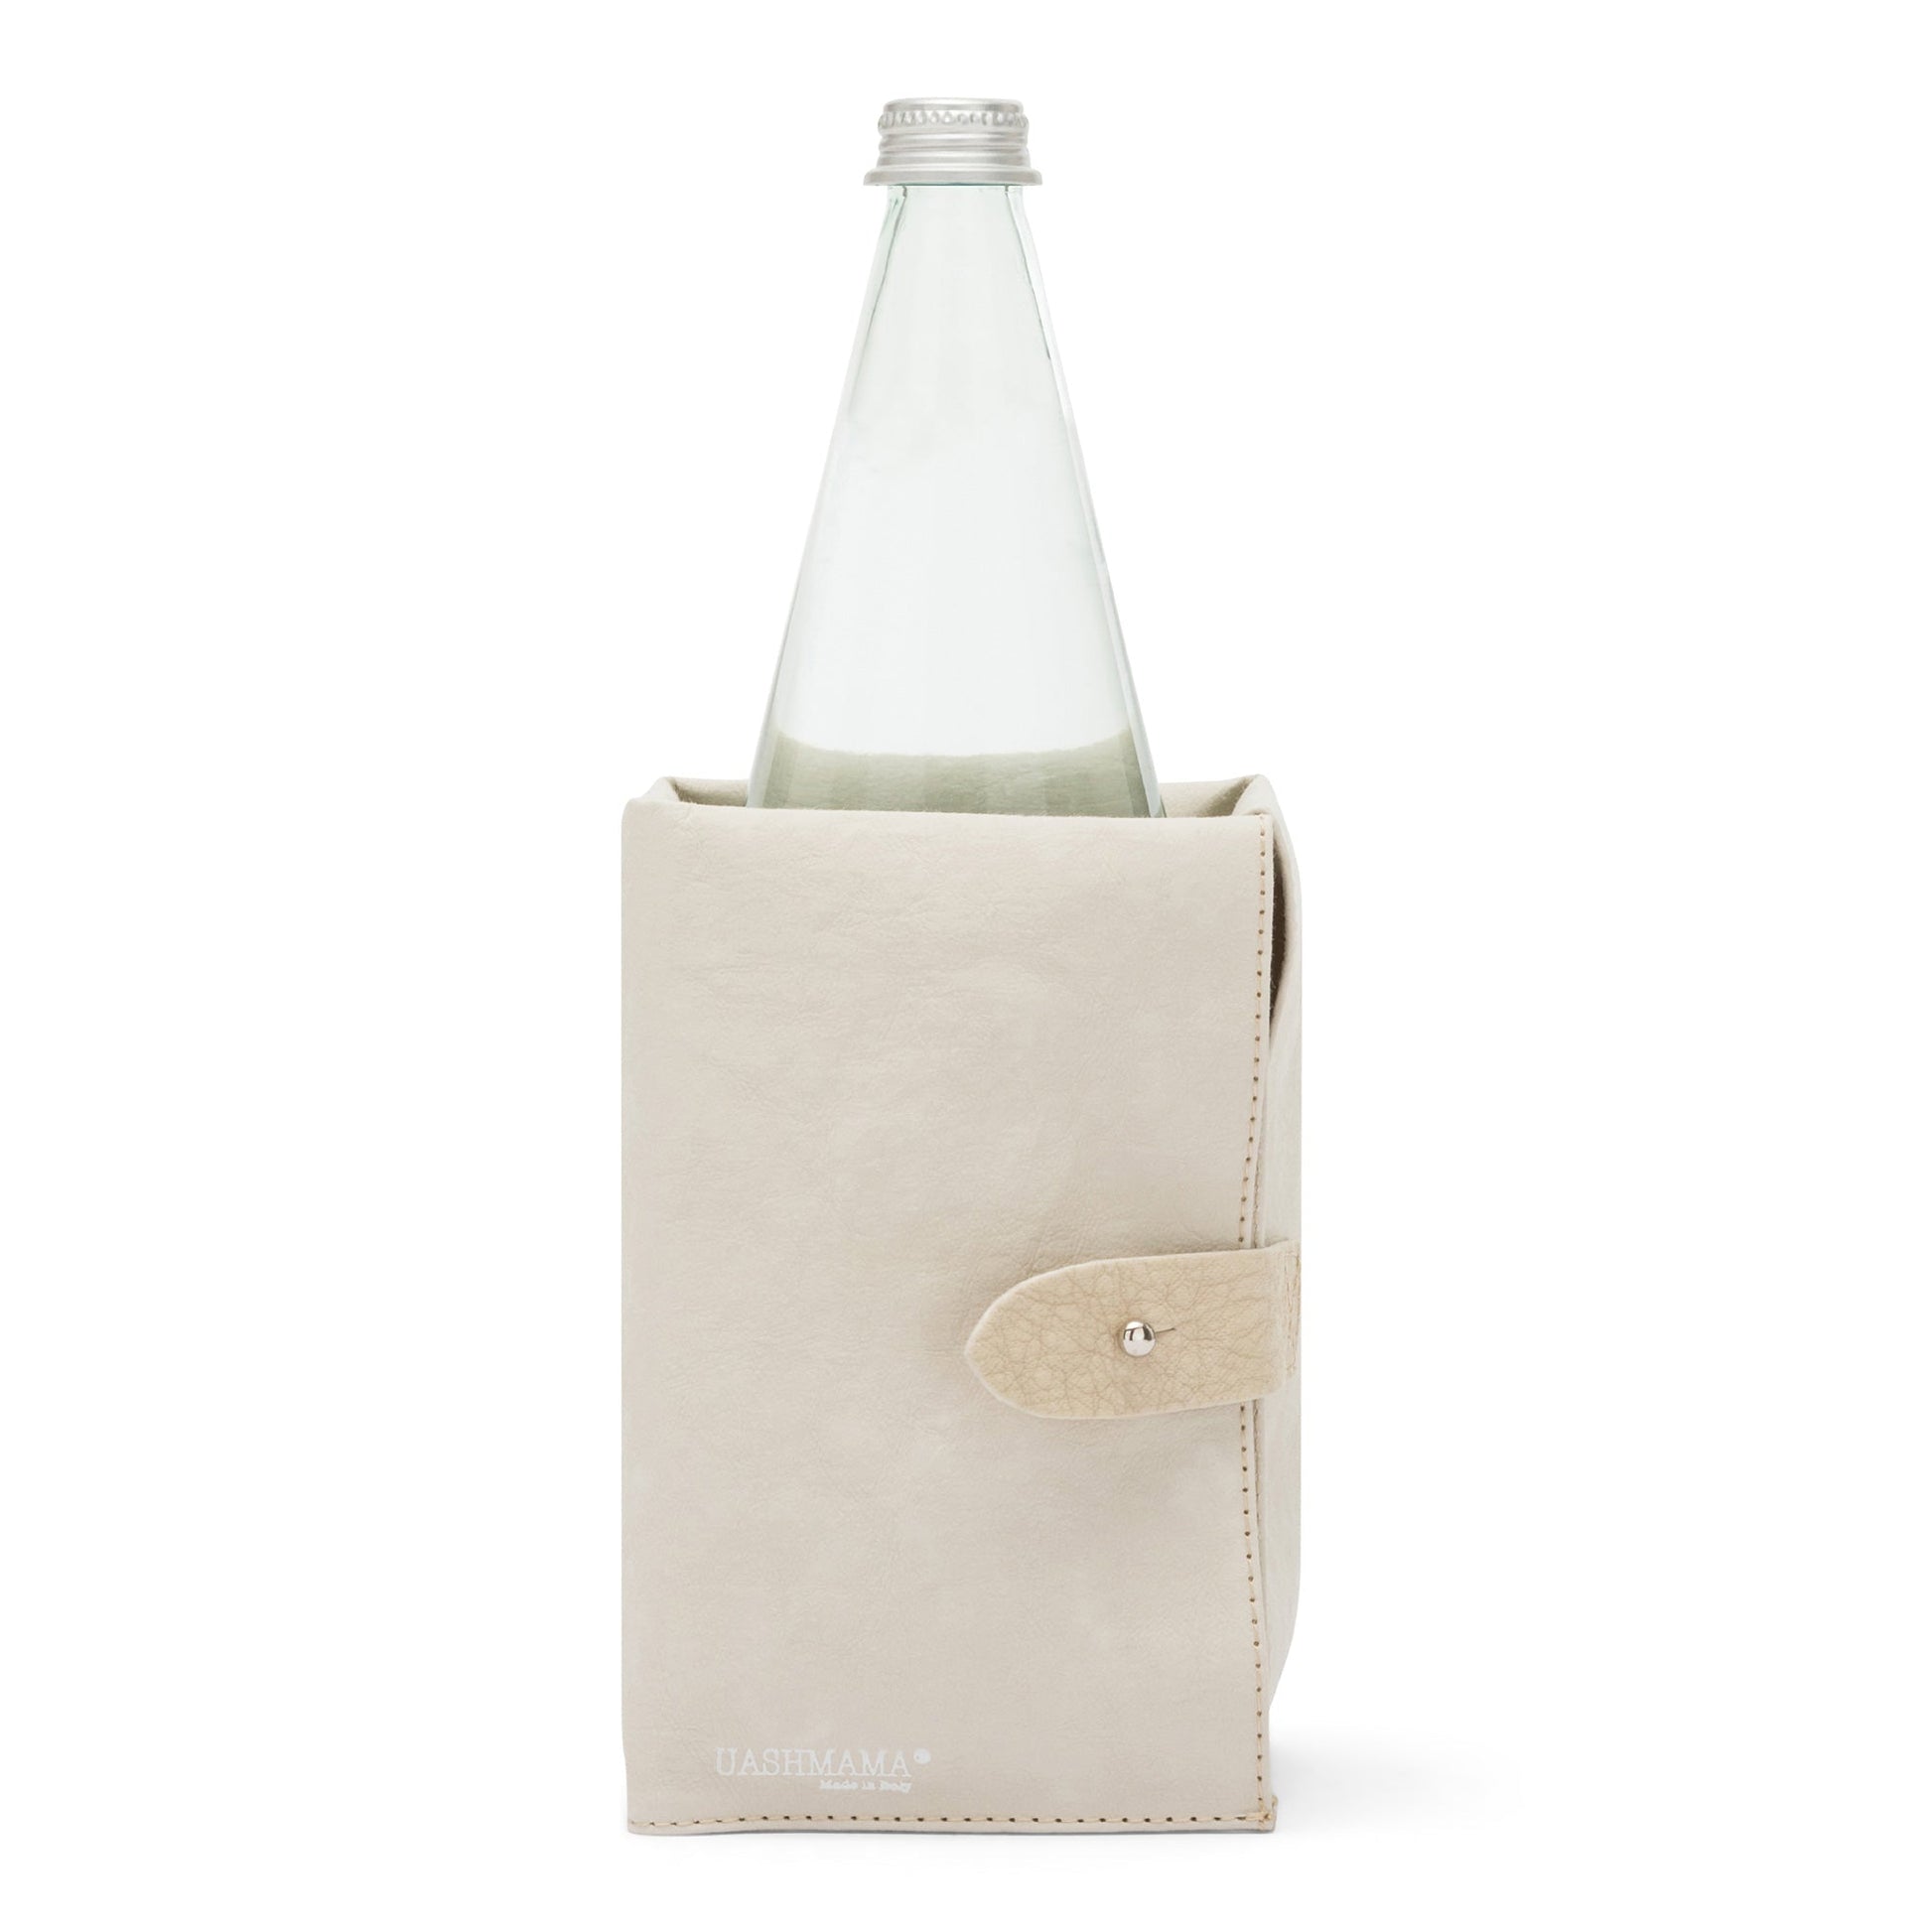 A cream washable paper cooler is shown with a washable paper side tab with silver stud. It contains a glass water bottle.